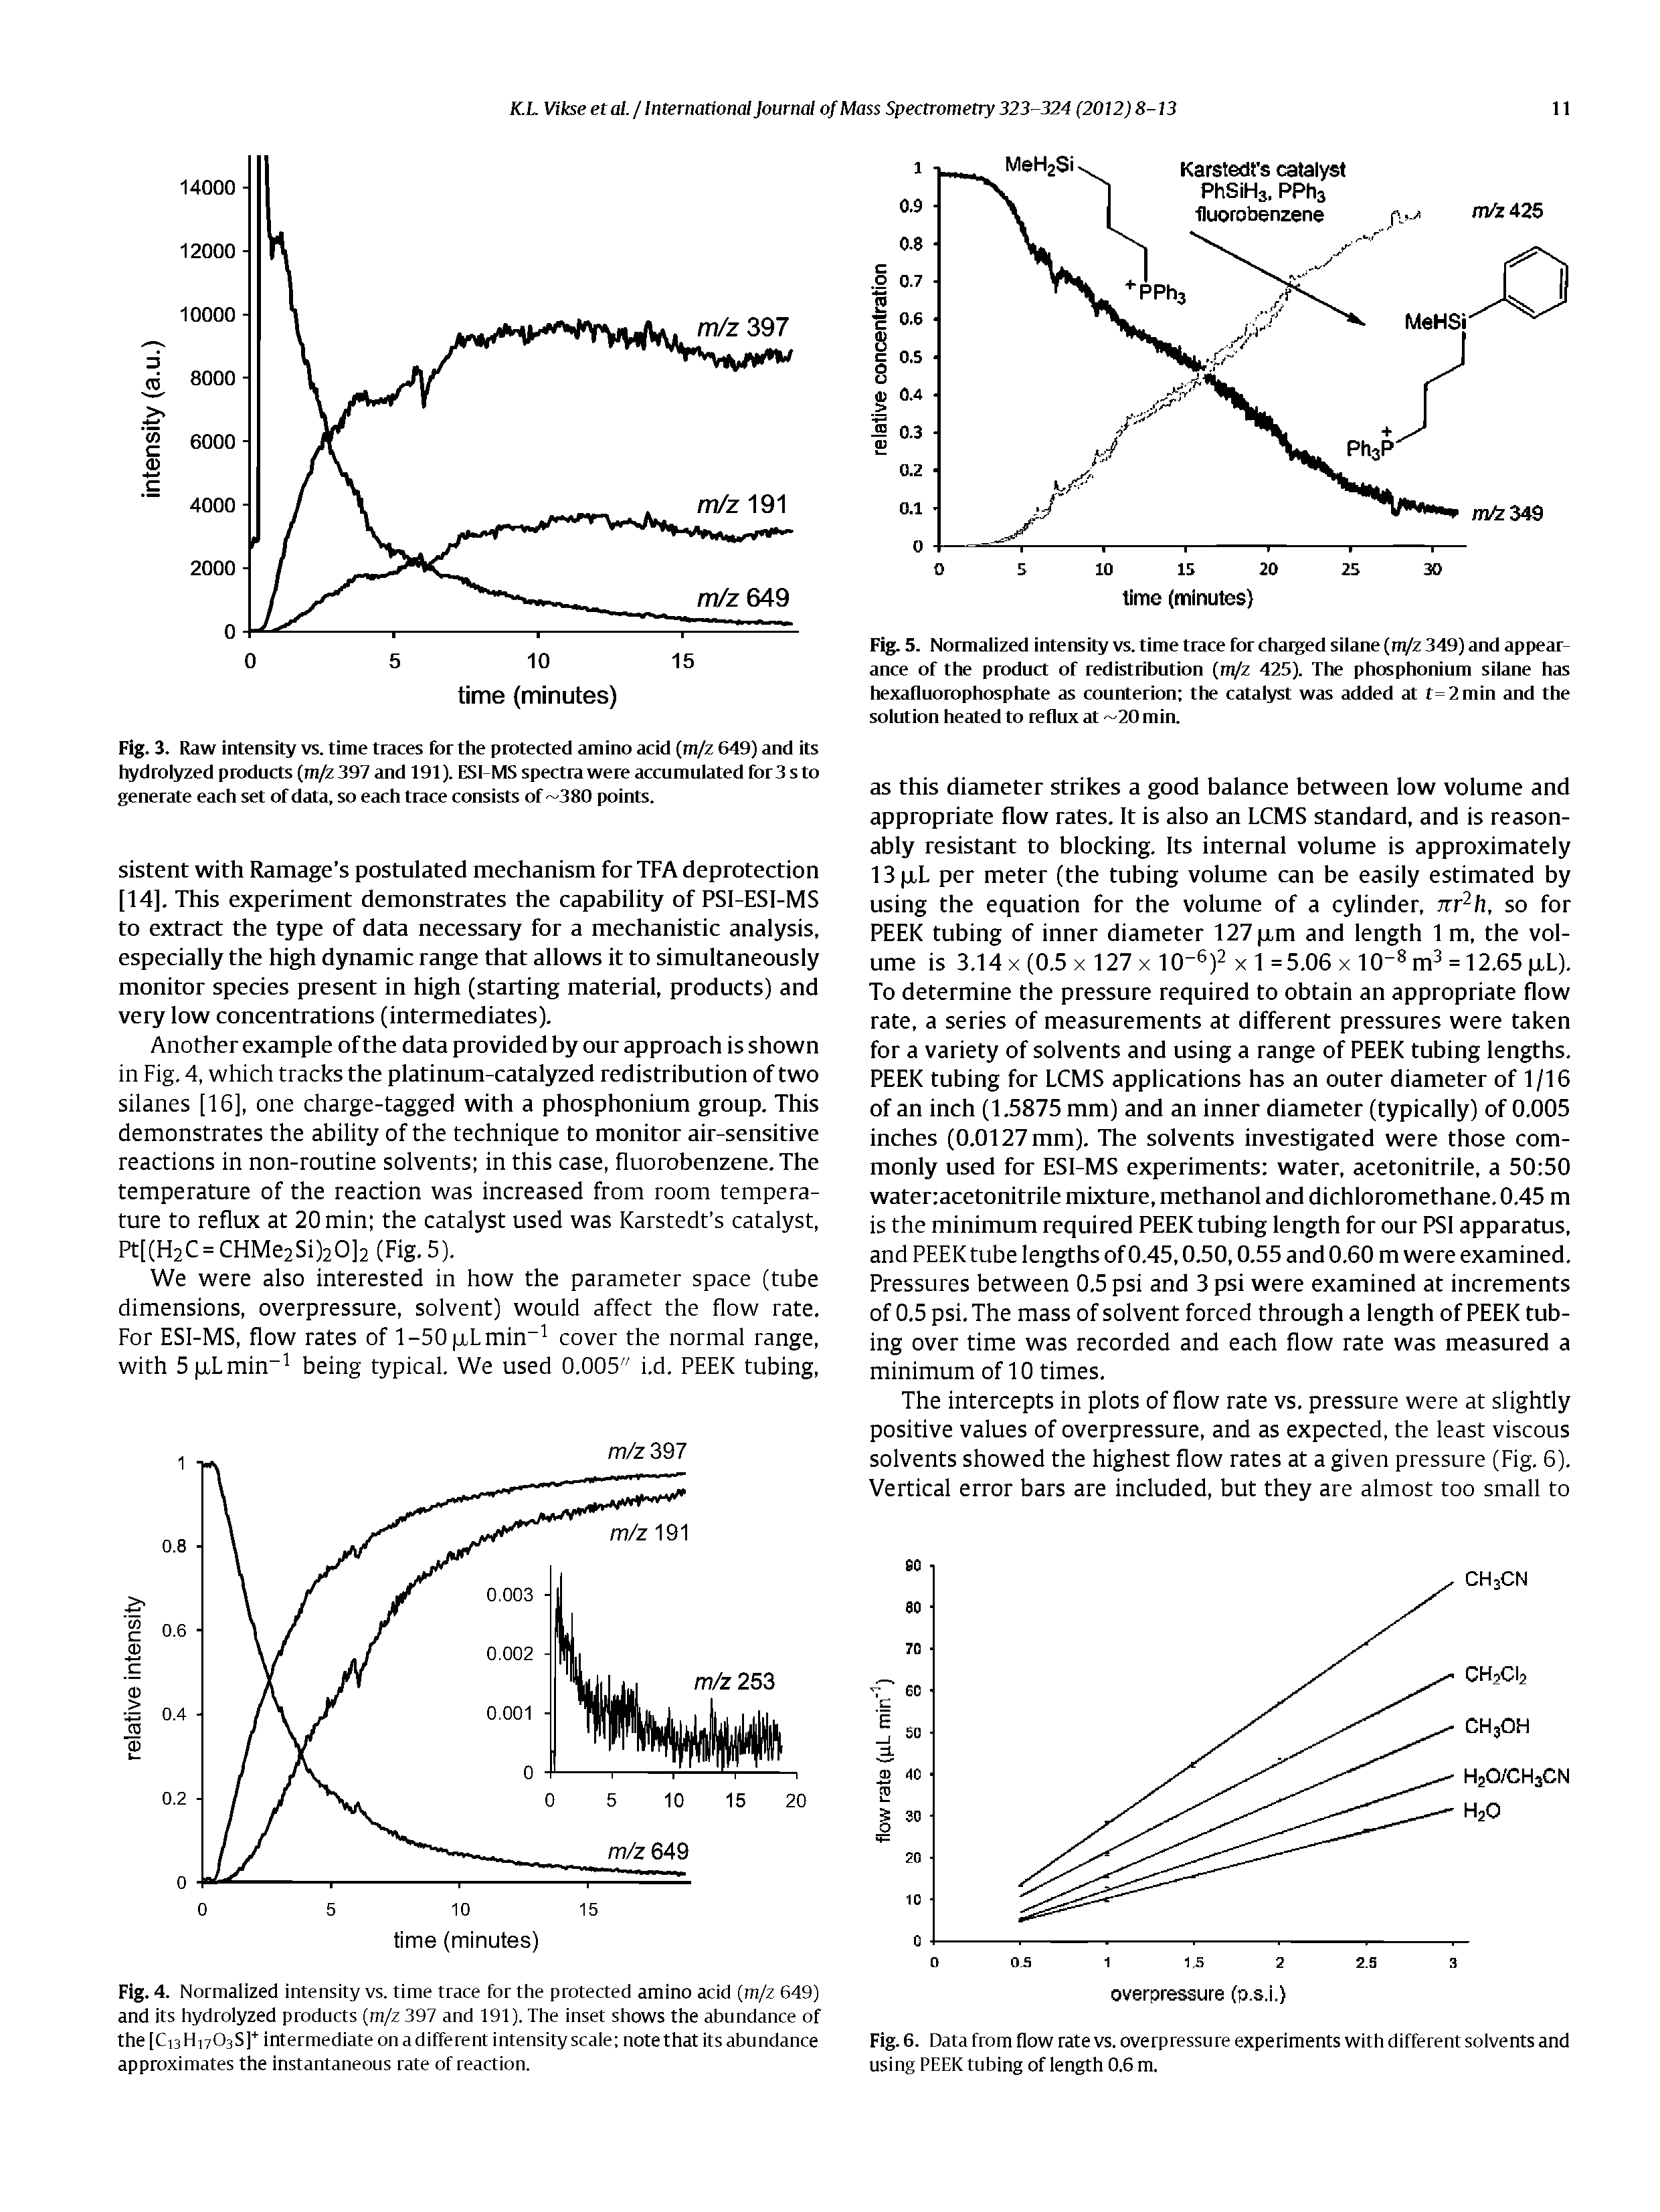 Fig. 5. Normalized intensity vs. time trace for charged silane (m/z 349) and appearance of the product of redistribution (m/z 425). The phosphonium silane has hexafluorophosphate as counterion the catalyst was added at t= 2 min and the solution heated to reflux at 20 min.